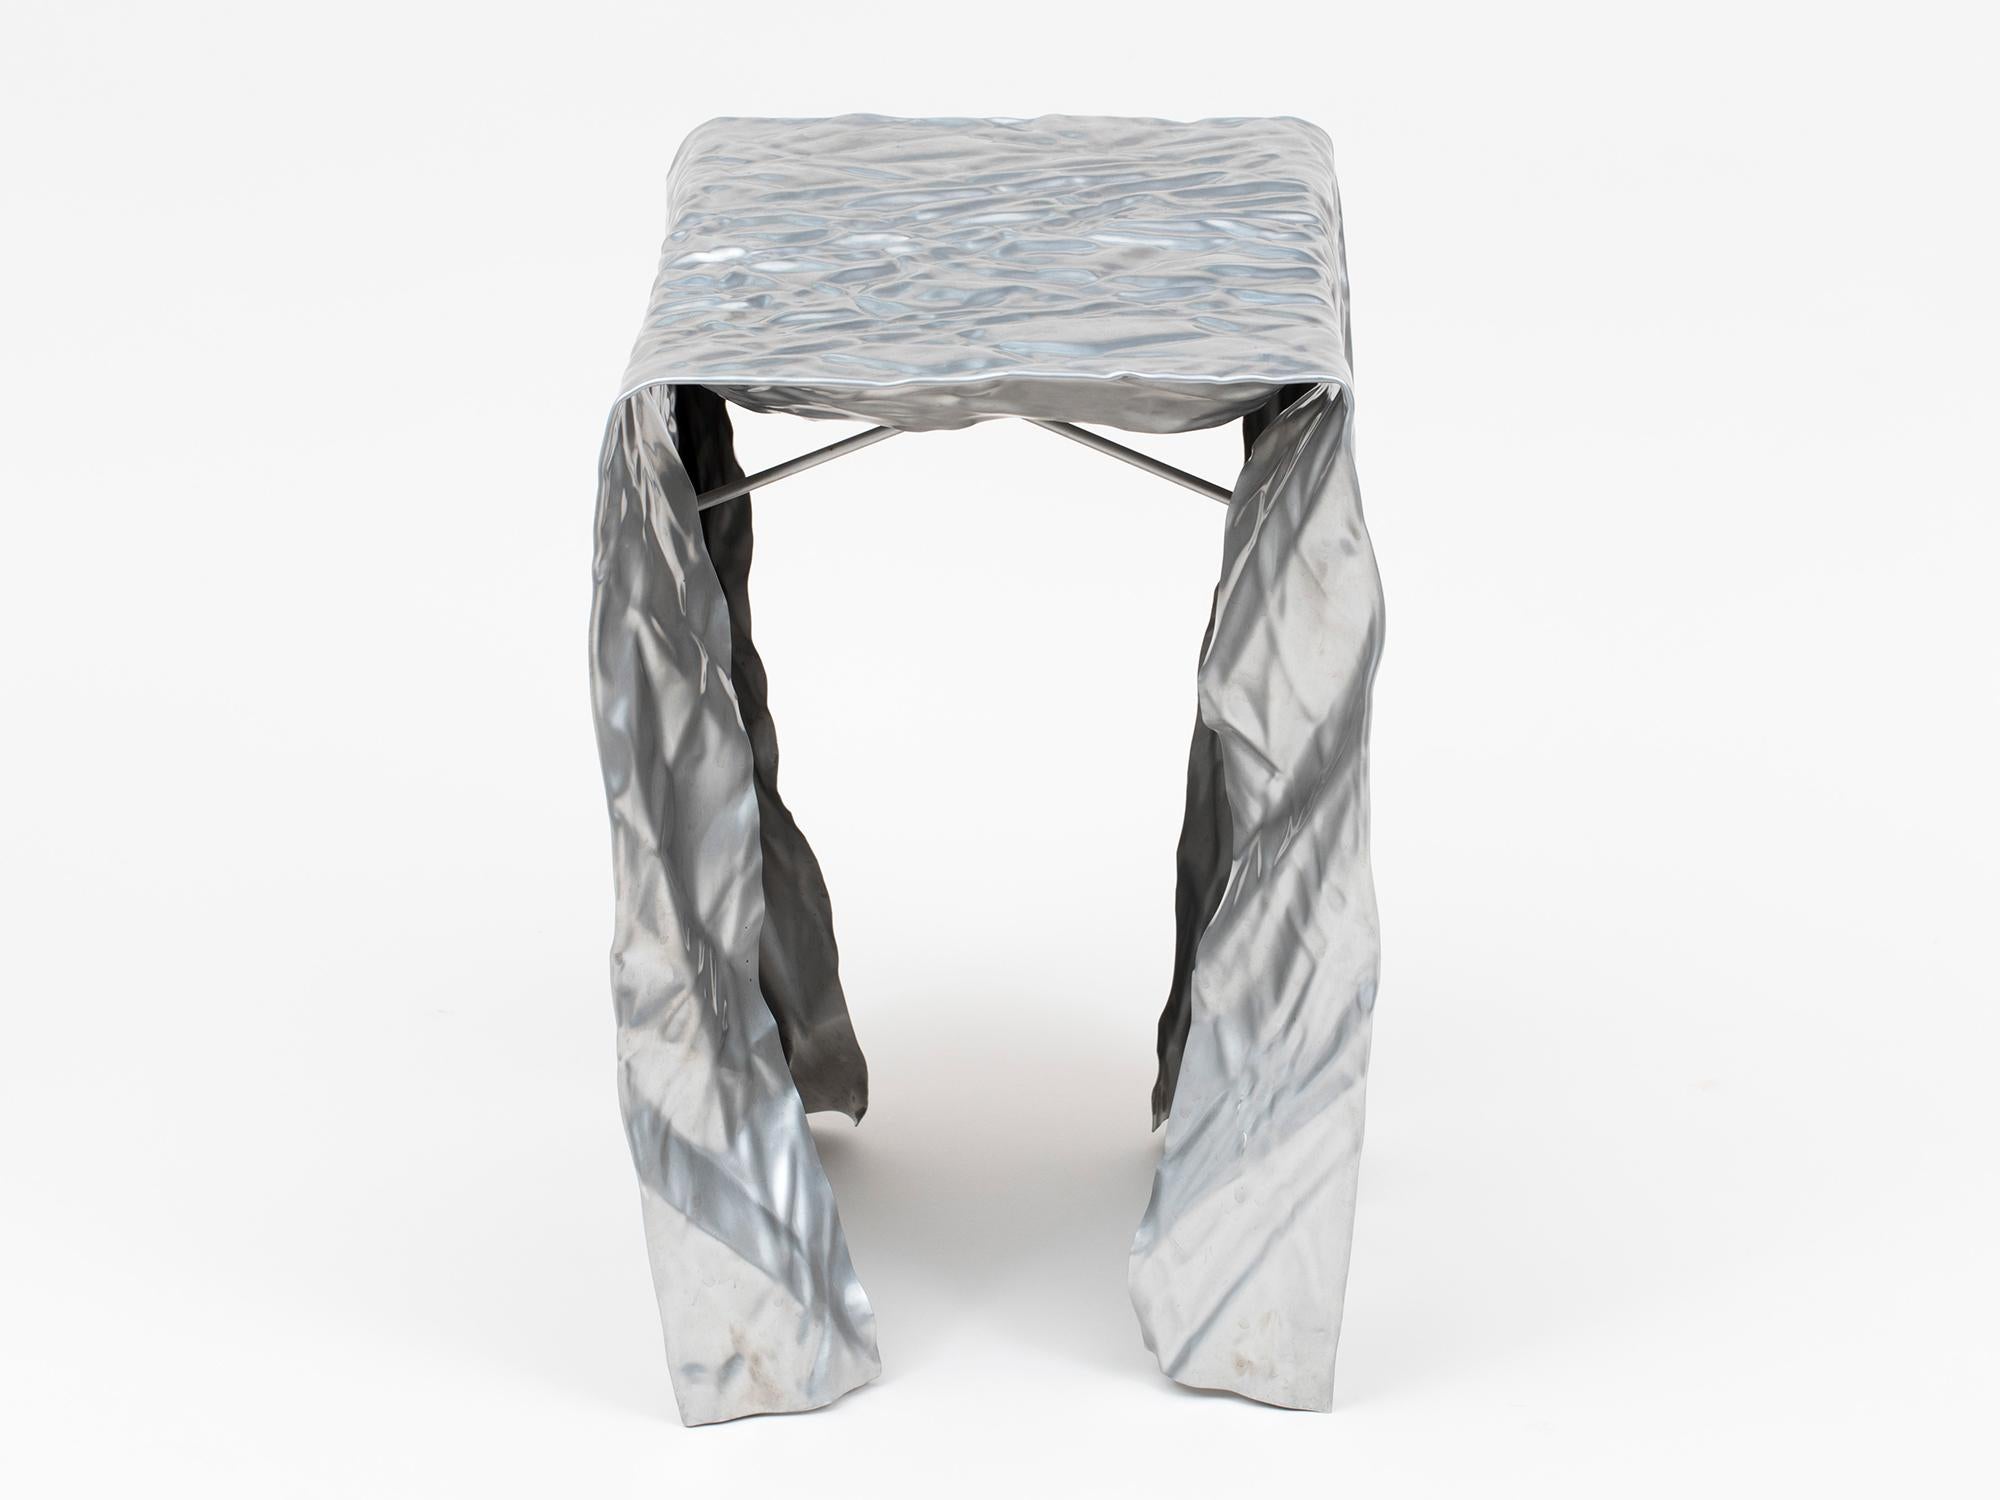 Wrinkled brushed stainless steel stool by Omaha-based designer Christopher Prinz. Can be used indoors or outside. 1 currently available. Lead time for additional and made-to-order custom works is 6-8 weeks. Available in a range of raw and polished